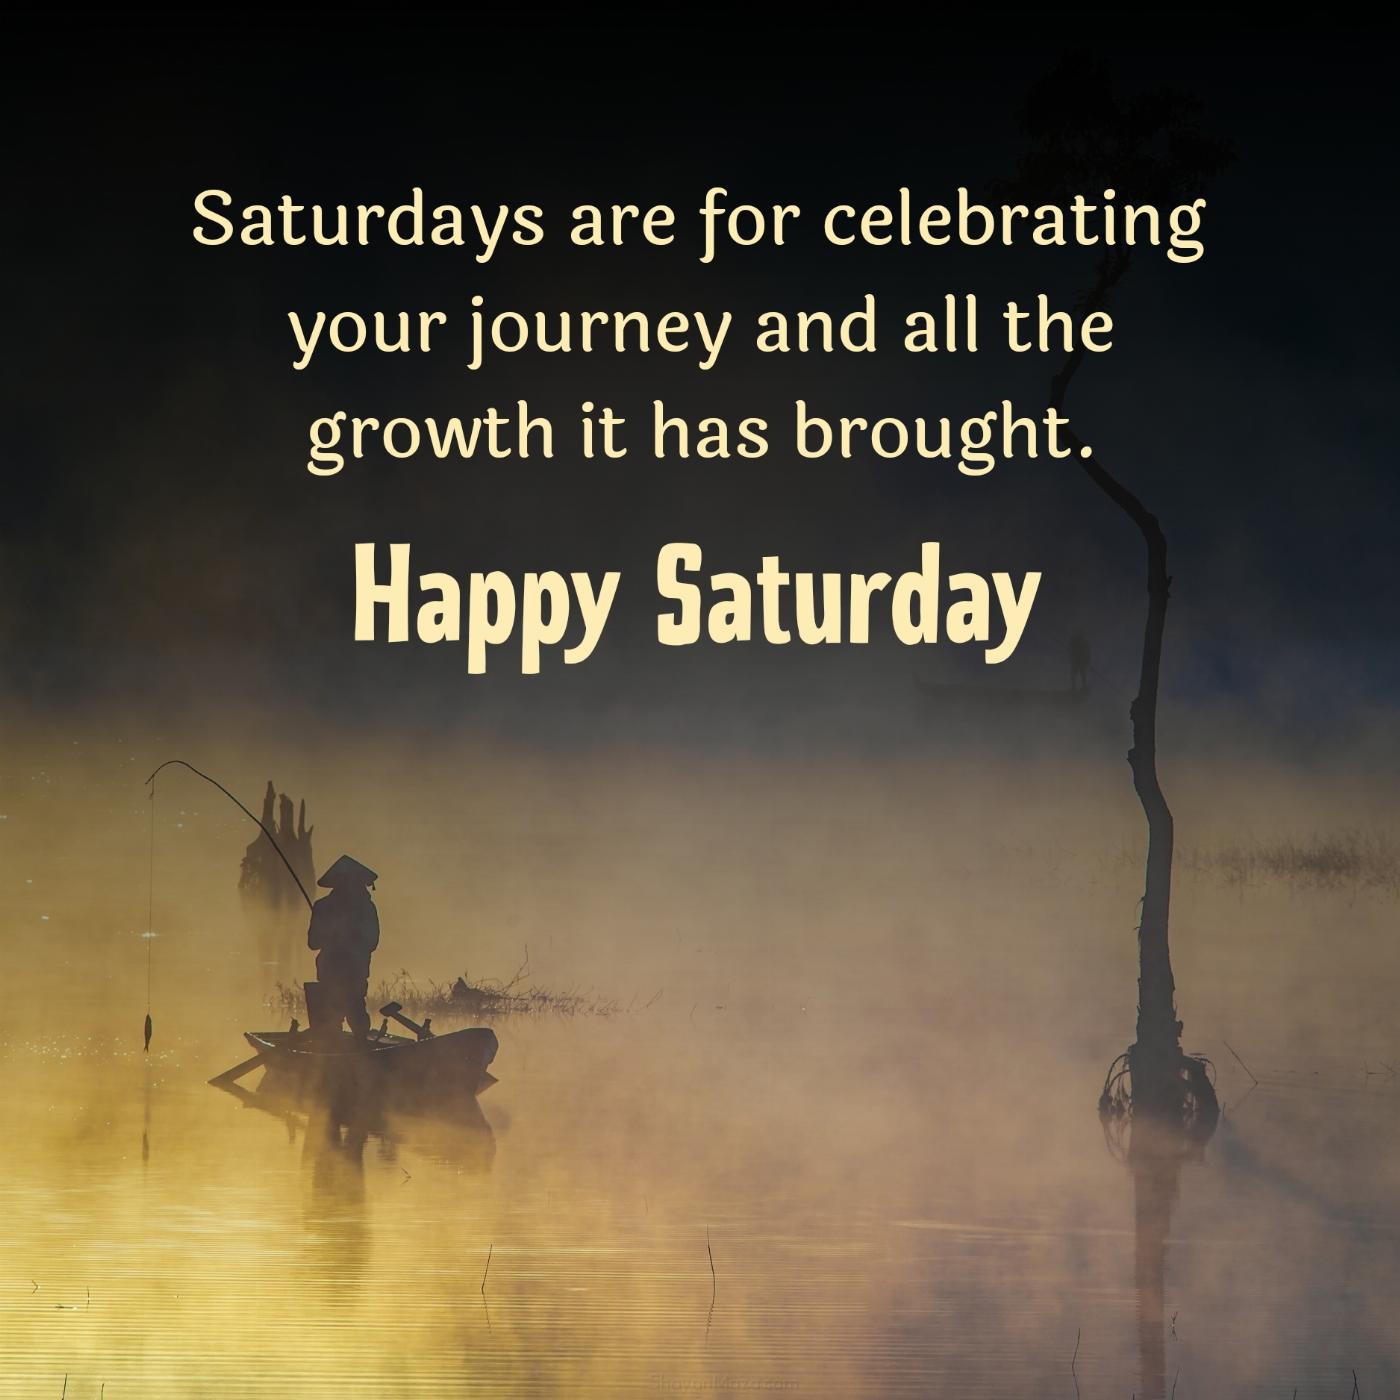 Saturdays are for celebrating your journey and all the growth